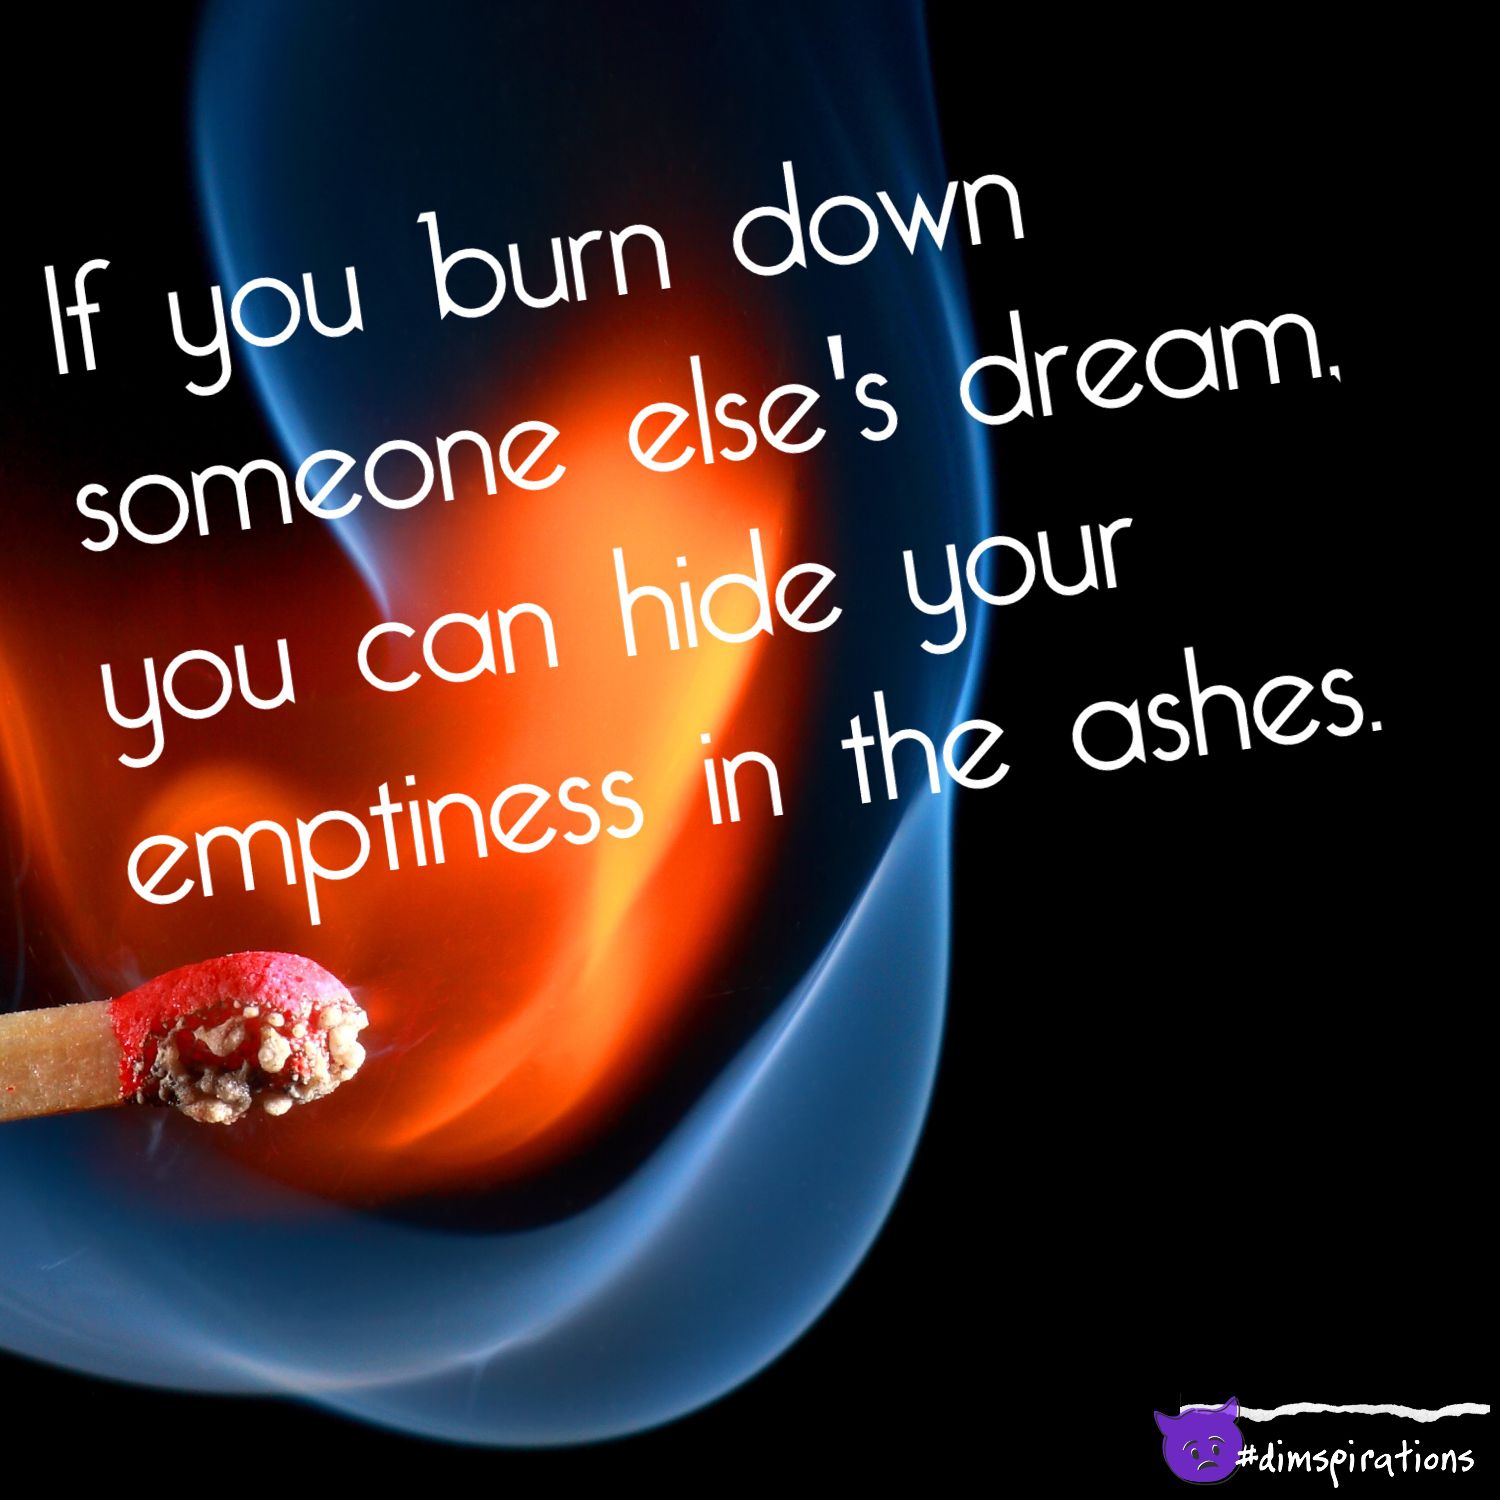 If you burn down someone else's dream, you can hide your emptiness in the ashes.